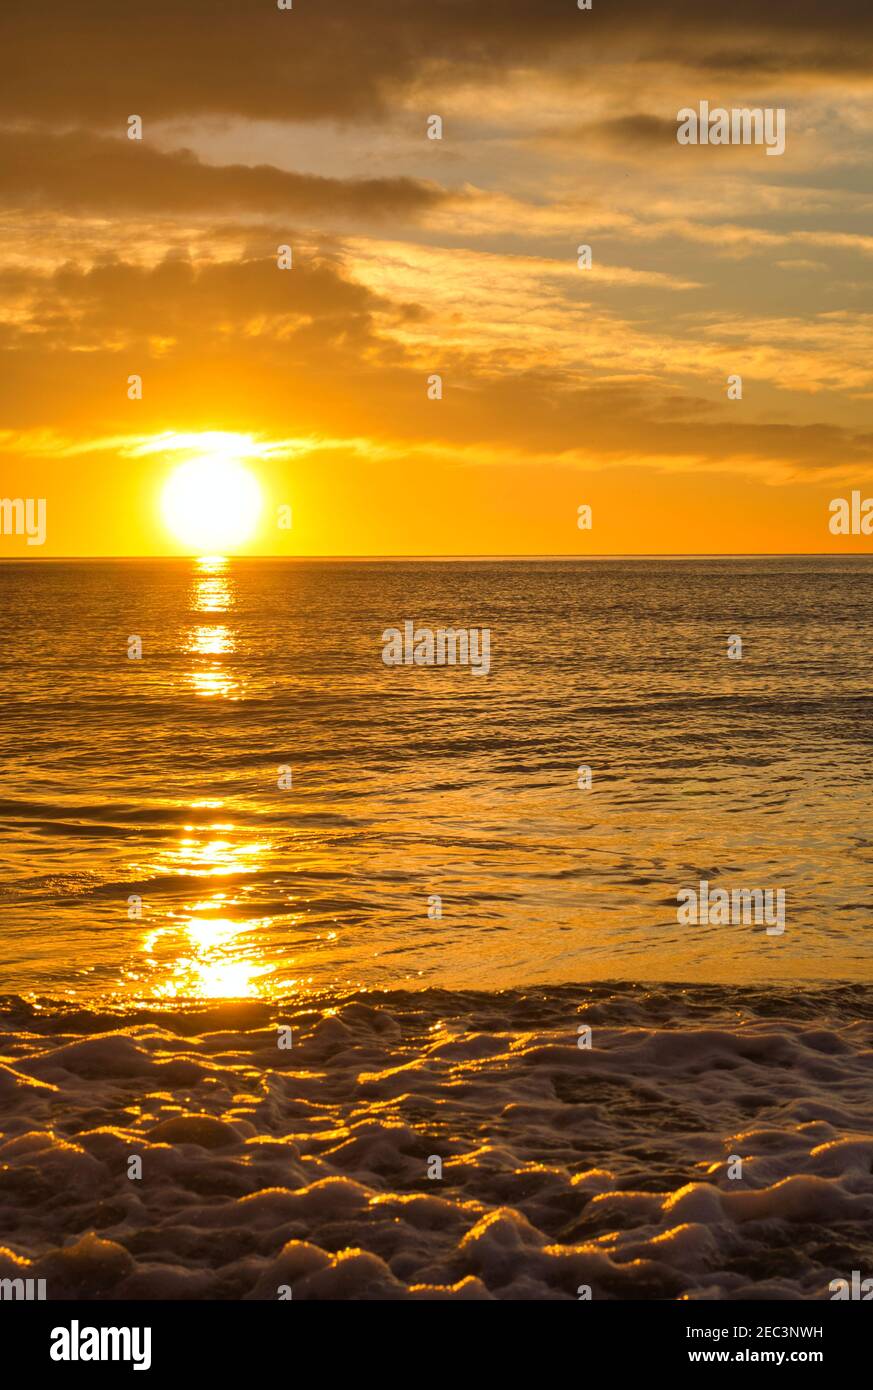 A nice and calm sunrise from the shore of the beach Stock Photo